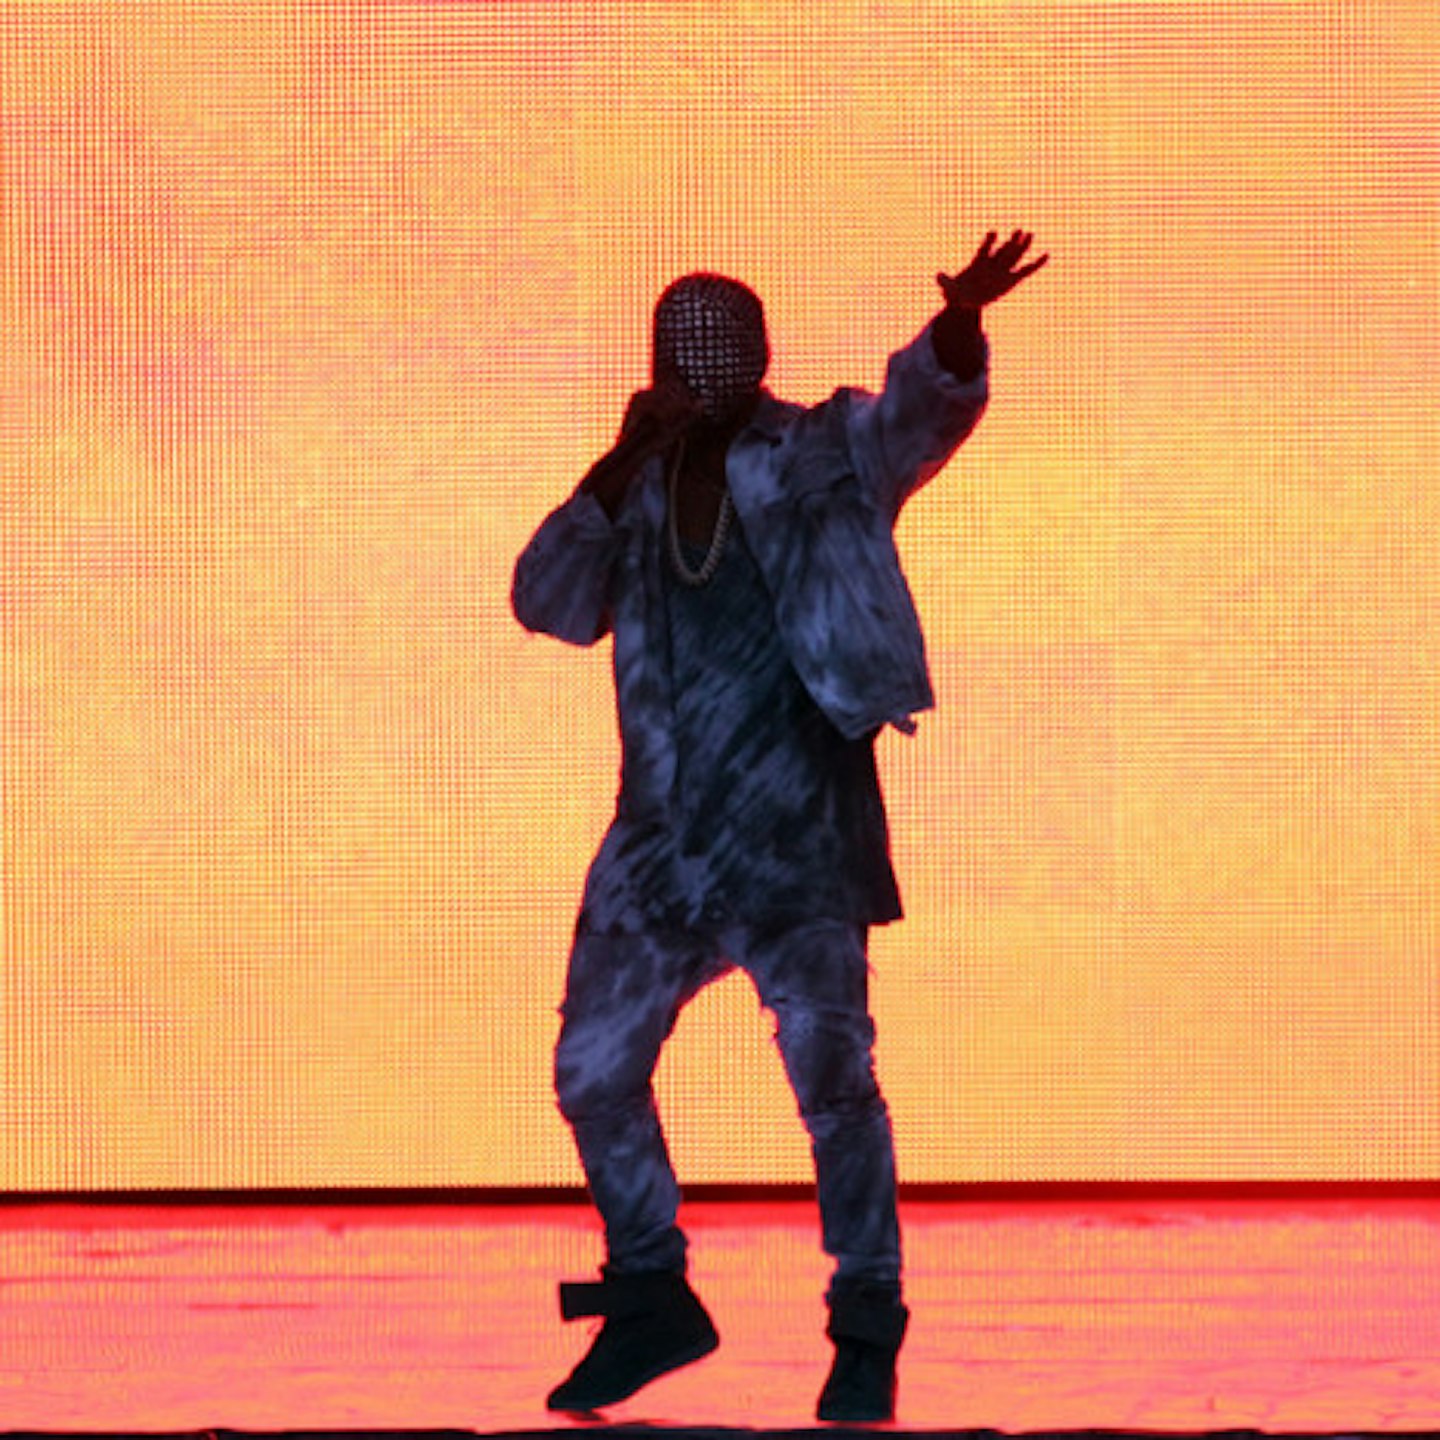 Kanye stopped his set at Wireless to complain about press intrusion